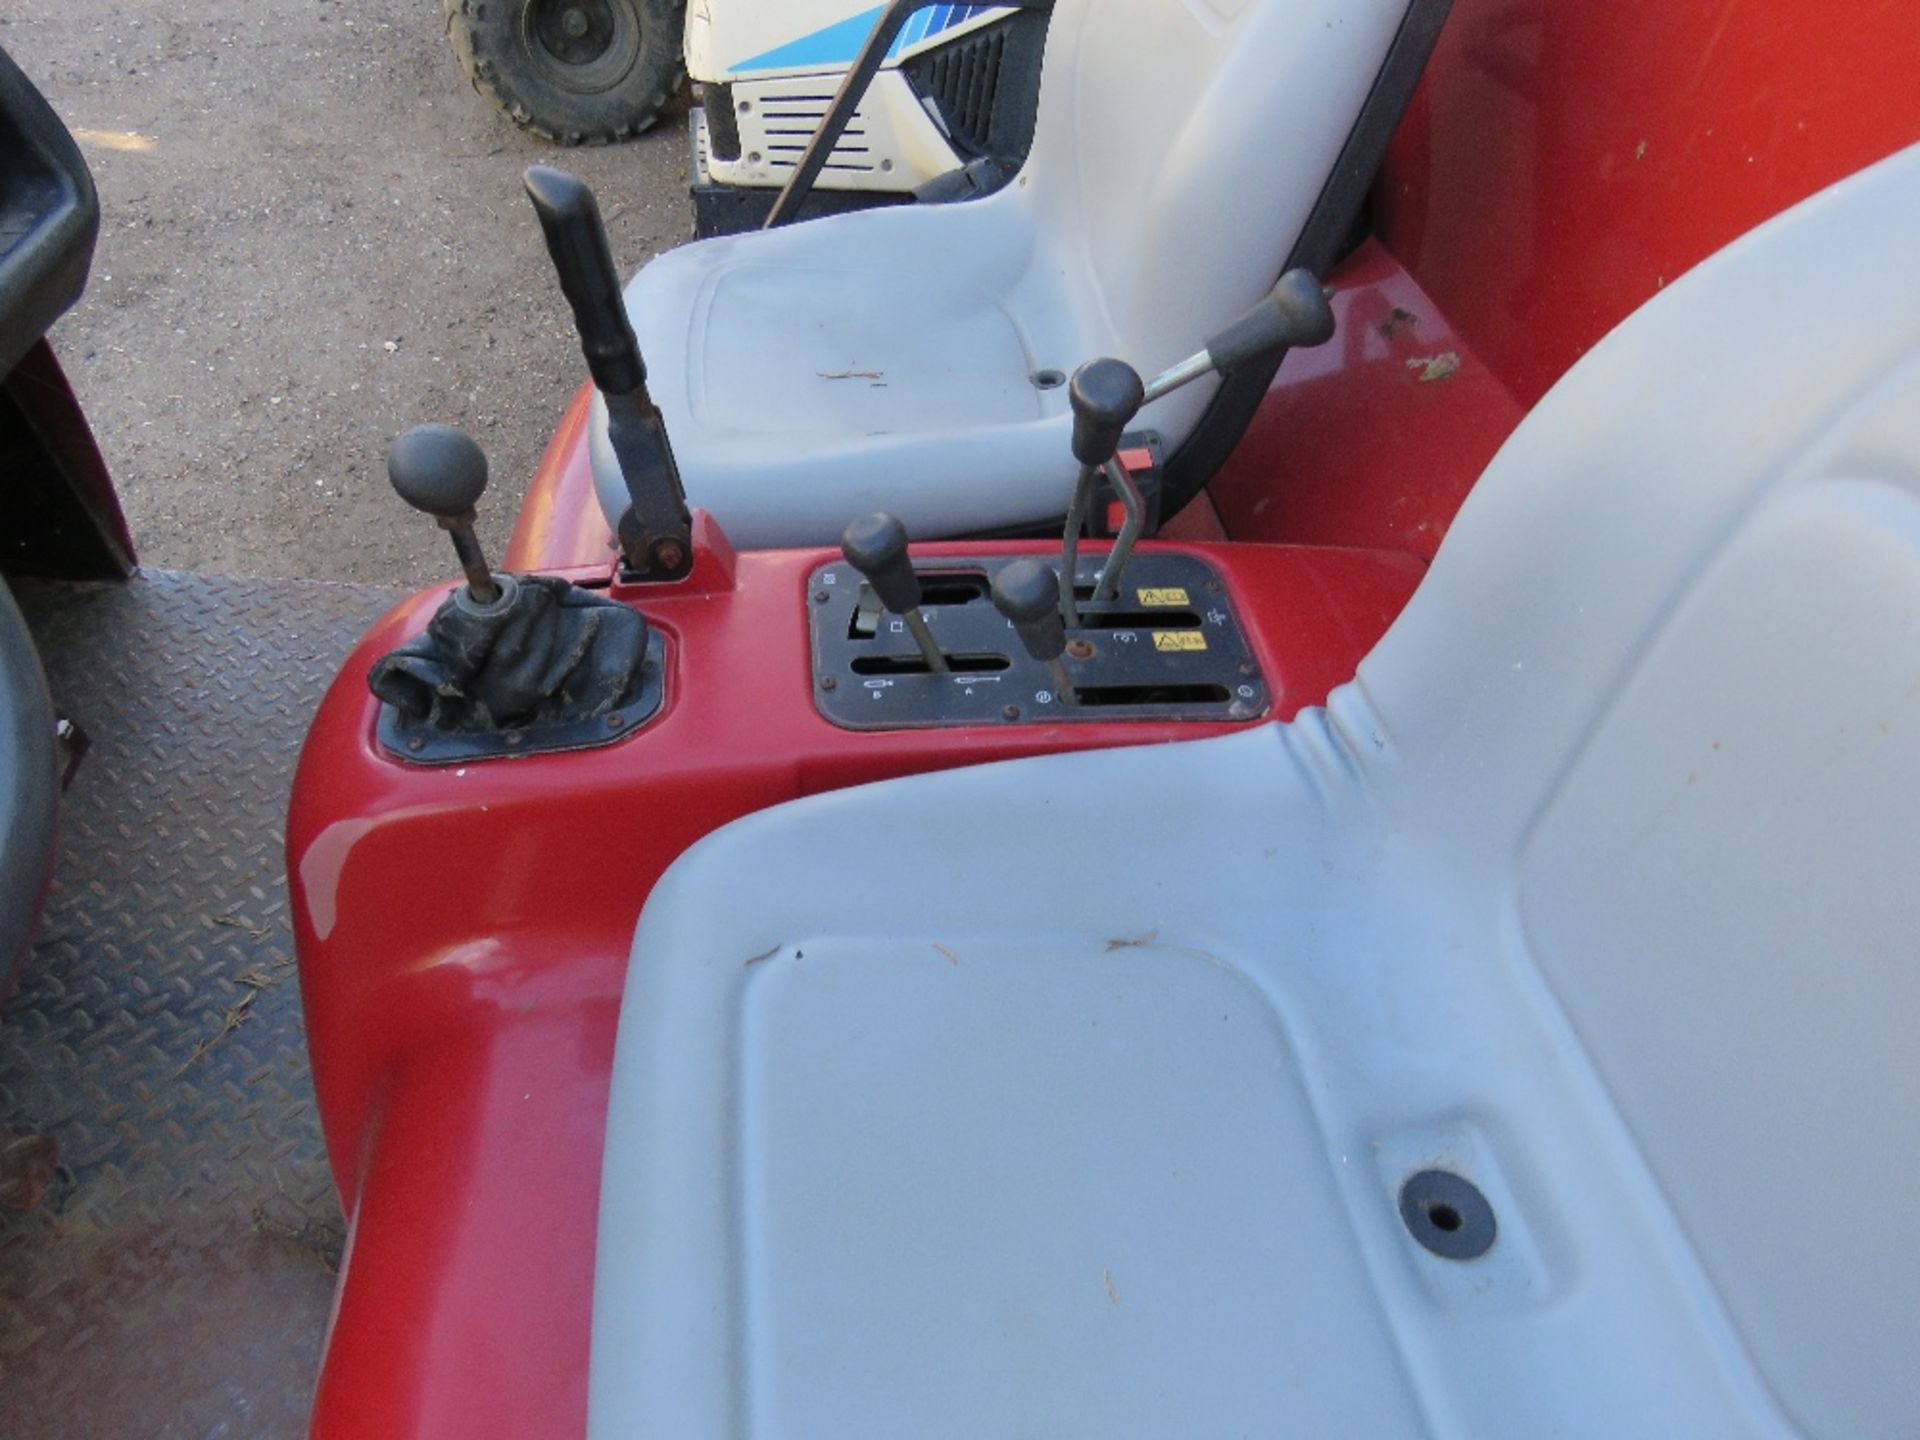 TORO WORMAN 2WD UTILITY VEHICLE. YEAR 2003 APPROX. WHEN TESTED WAS SEEN TO DRIVE, STEER AND BRAKE AN - Image 5 of 6